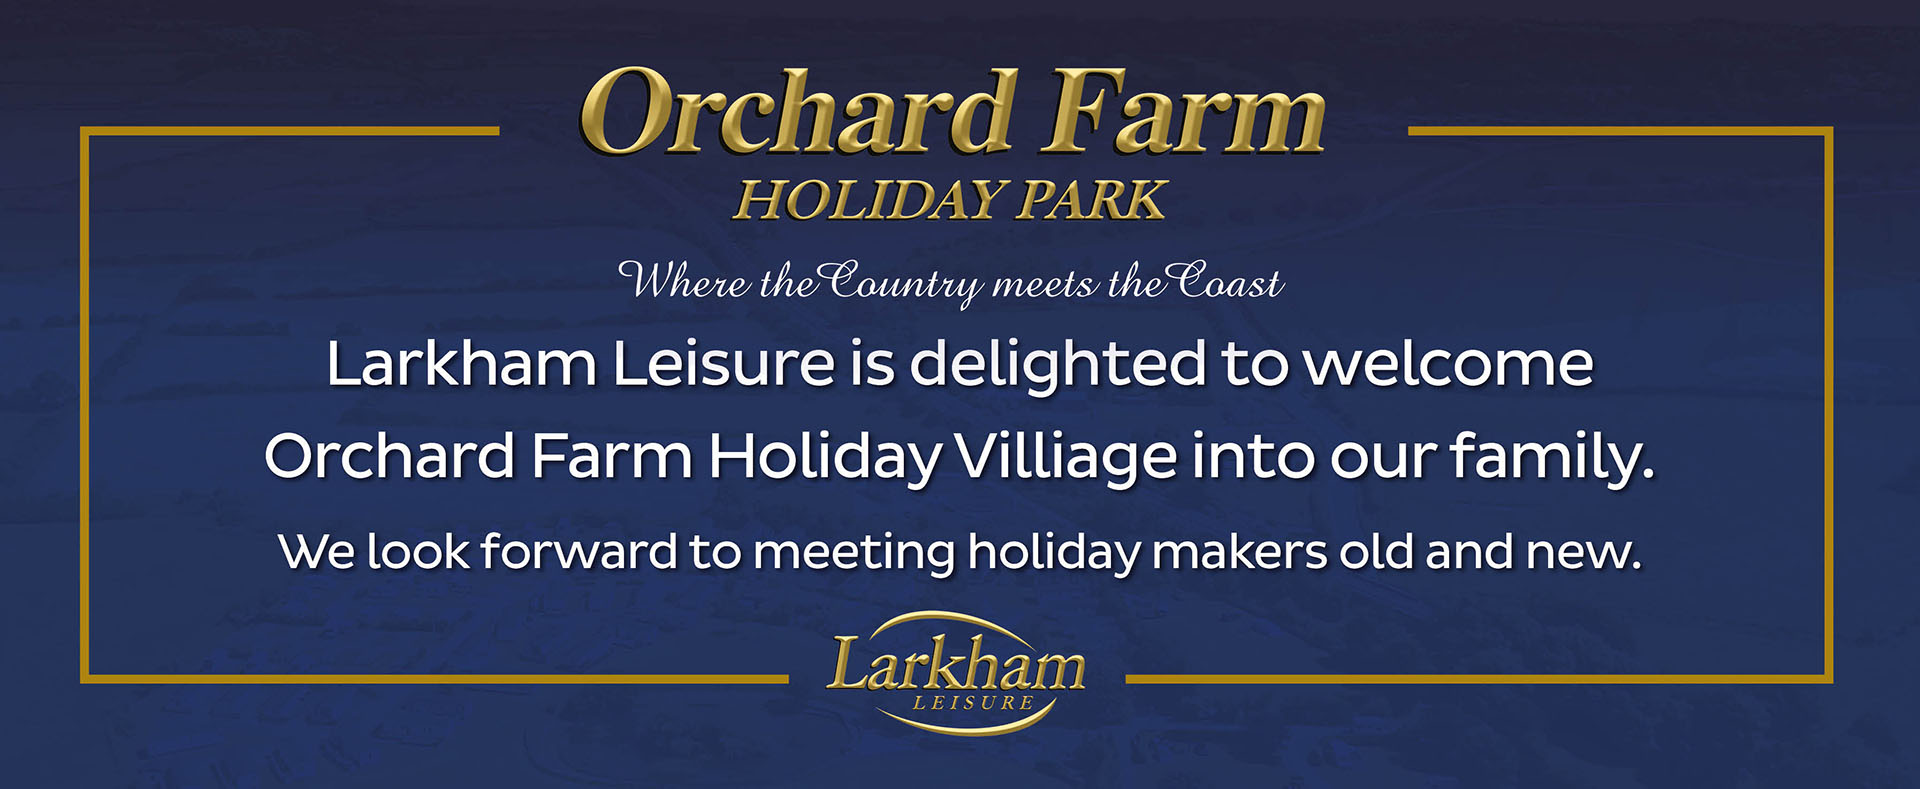 Larkham Leisure is delighted to welcome Orchard Farm Holiday Village into our family. We look forward to meeting holiday makers old and new.